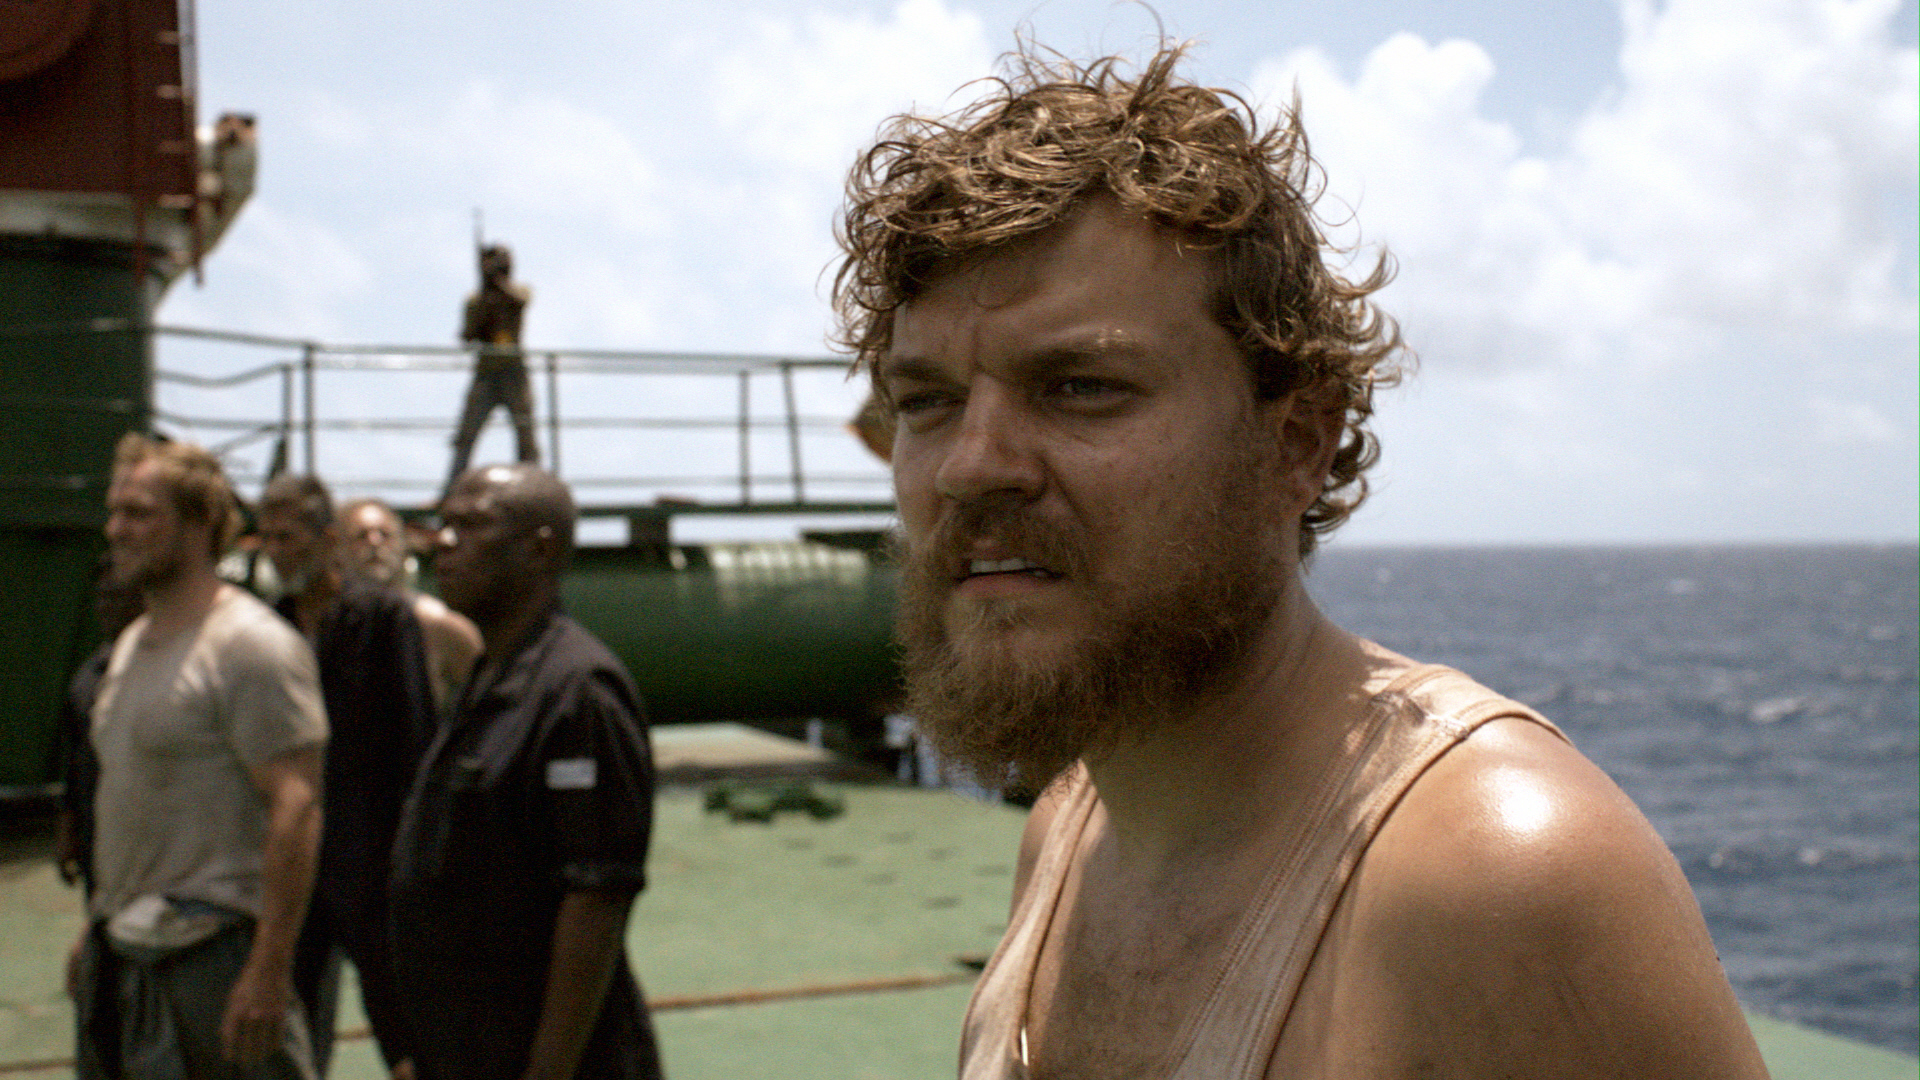 Pilou Asbæk as the captive cook in A Hijacking.